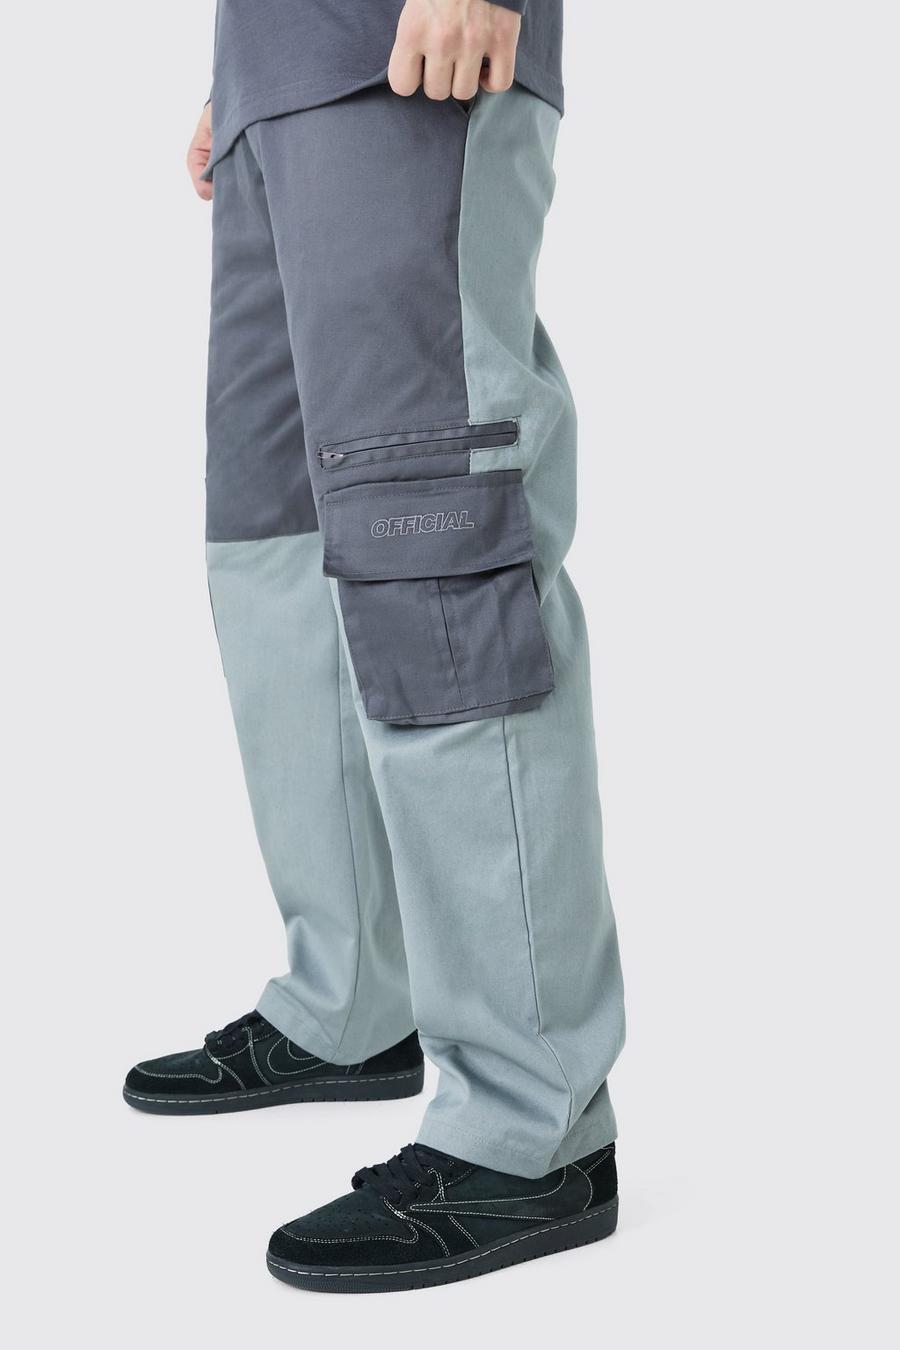 Tall lockere Colorblock Cargo-Hose mit Official-Logo, Charcoal grey